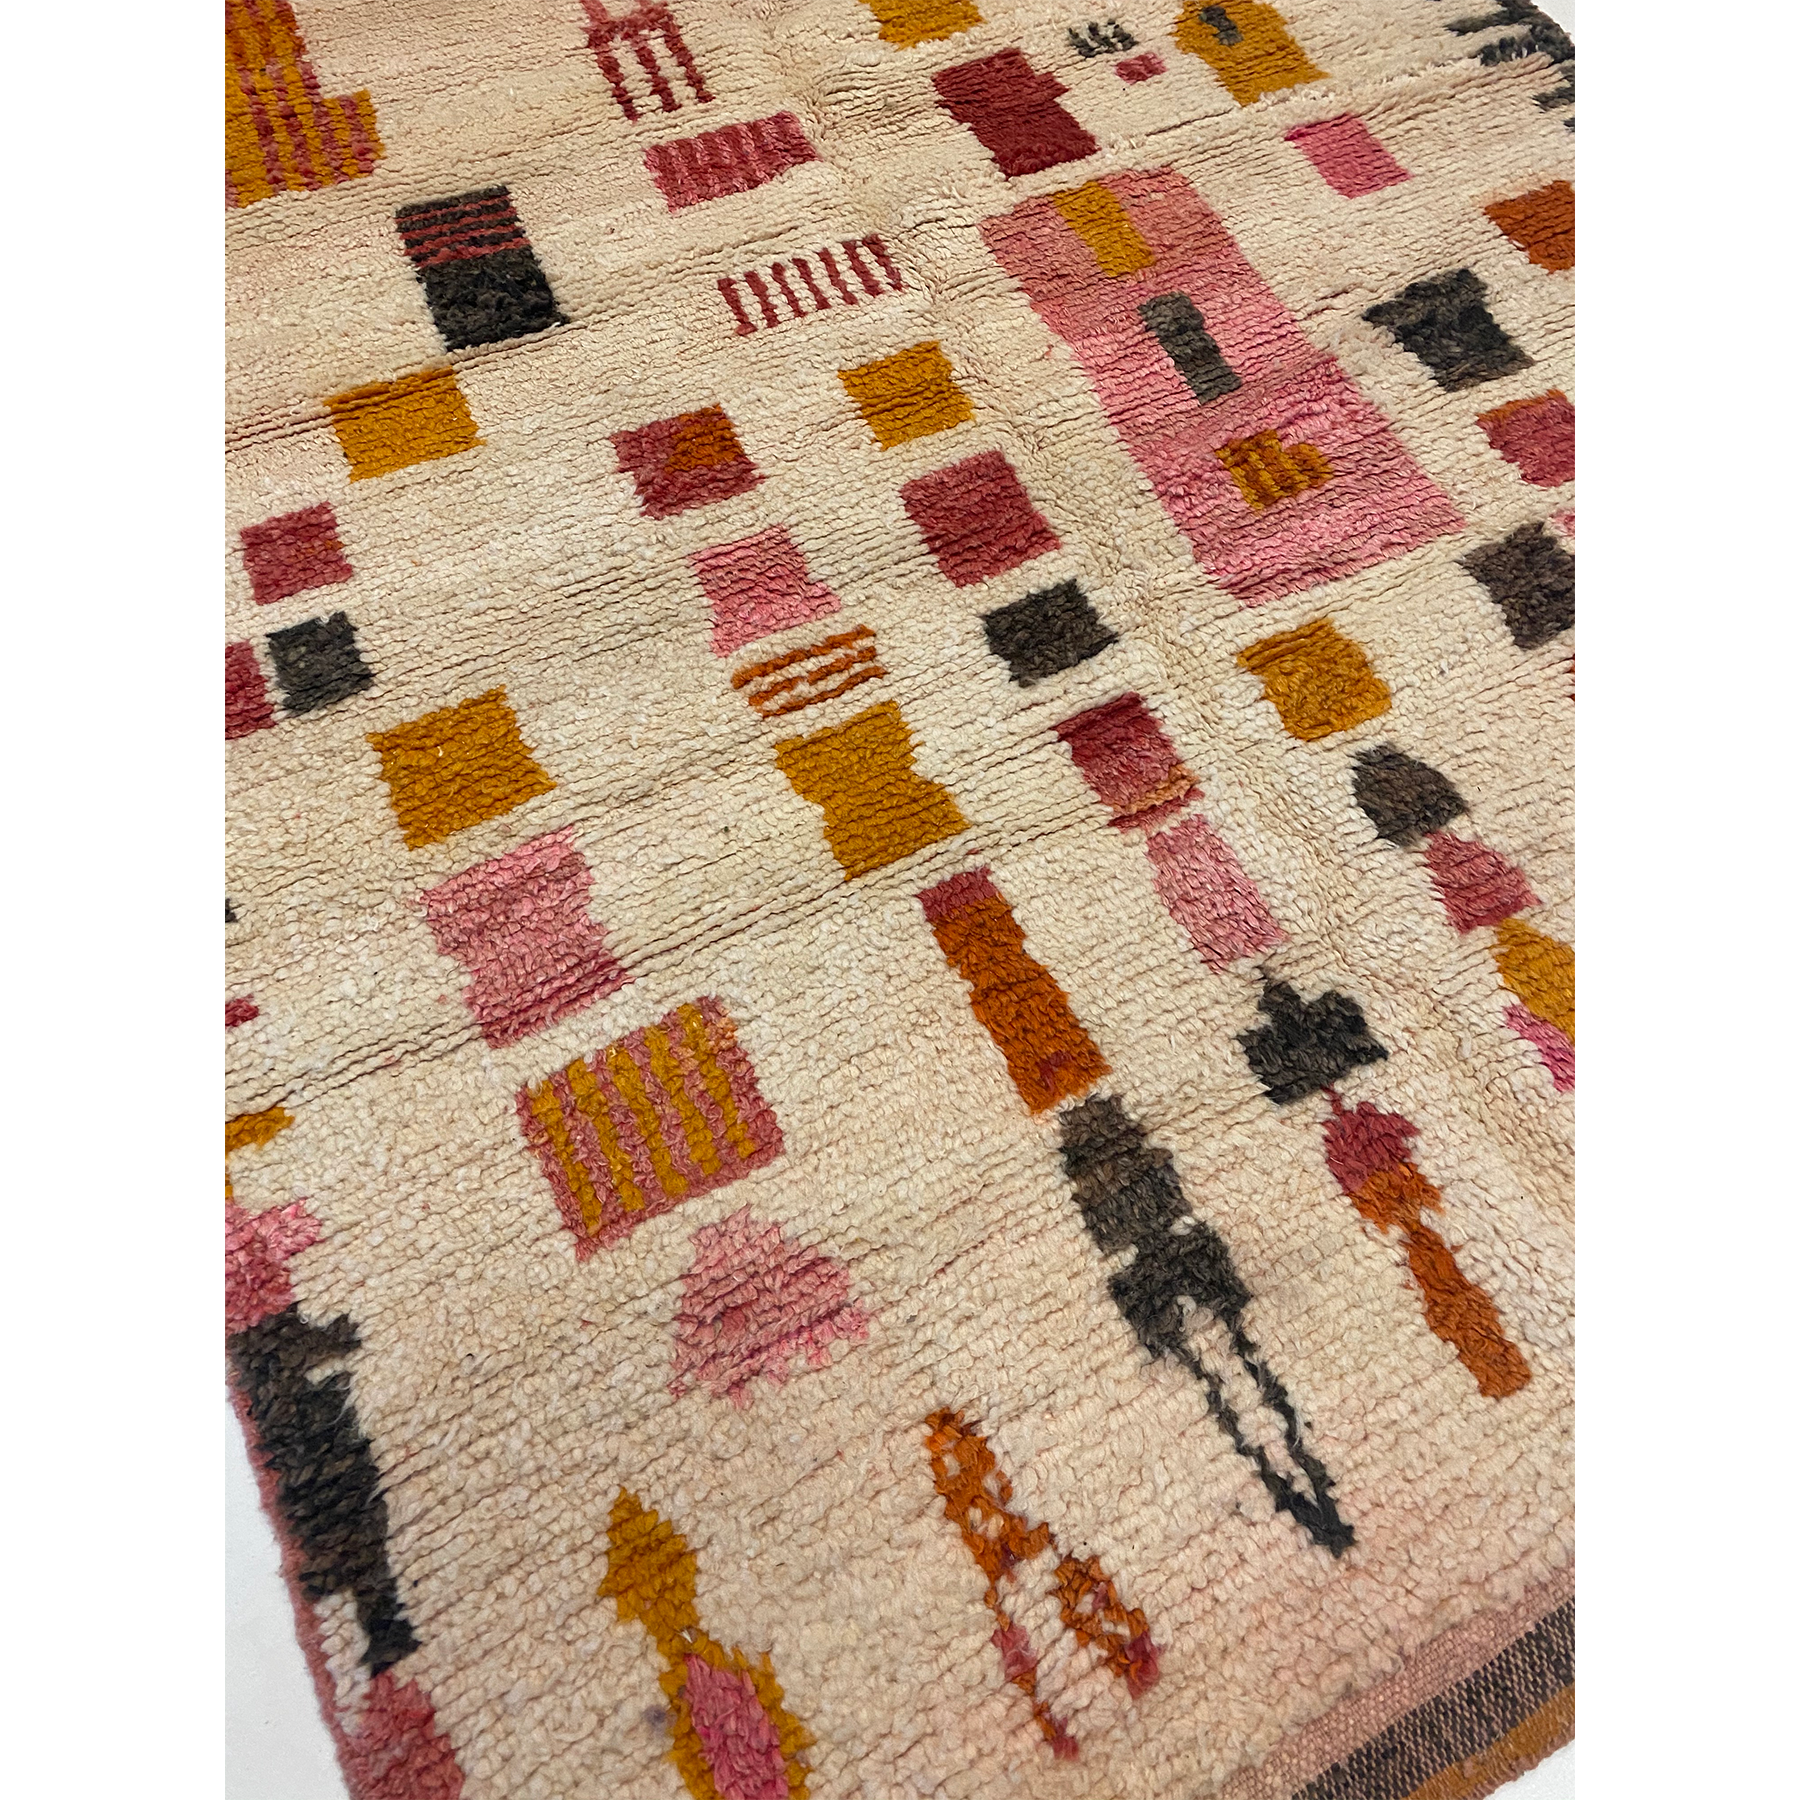 cream-colored Moroccan rug with designs in blush pink and mustard yellow